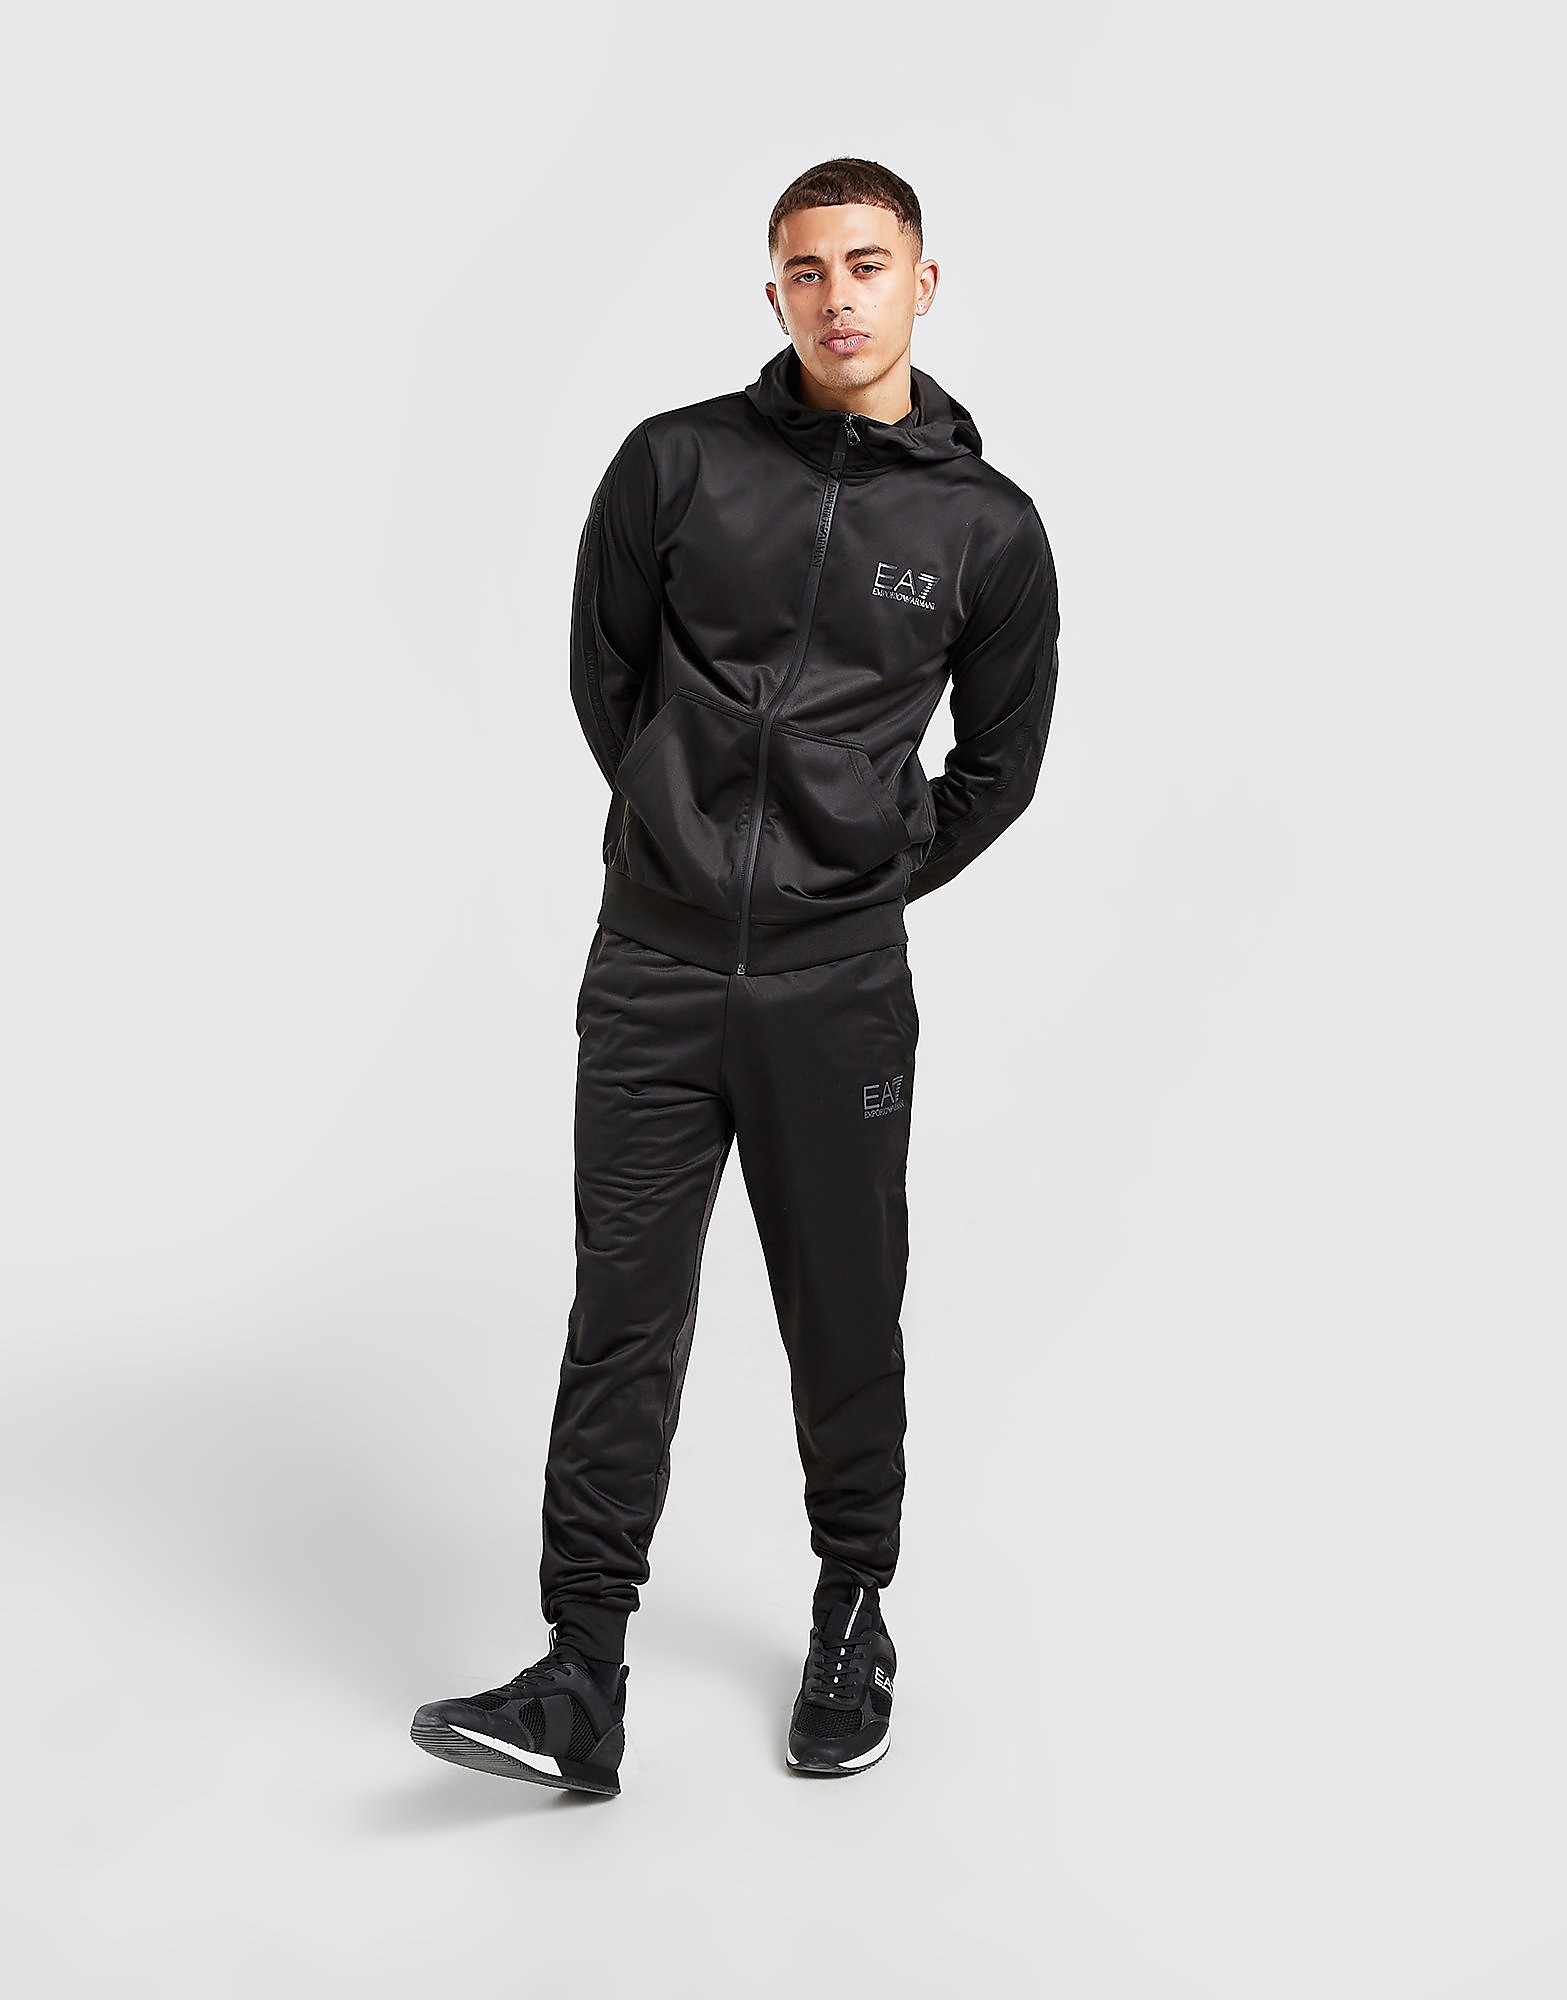 

Emporio Armani EA7 Elasticated Tape Full Zip Poly Tracksuit - Only at JD - Black - Mens, Black